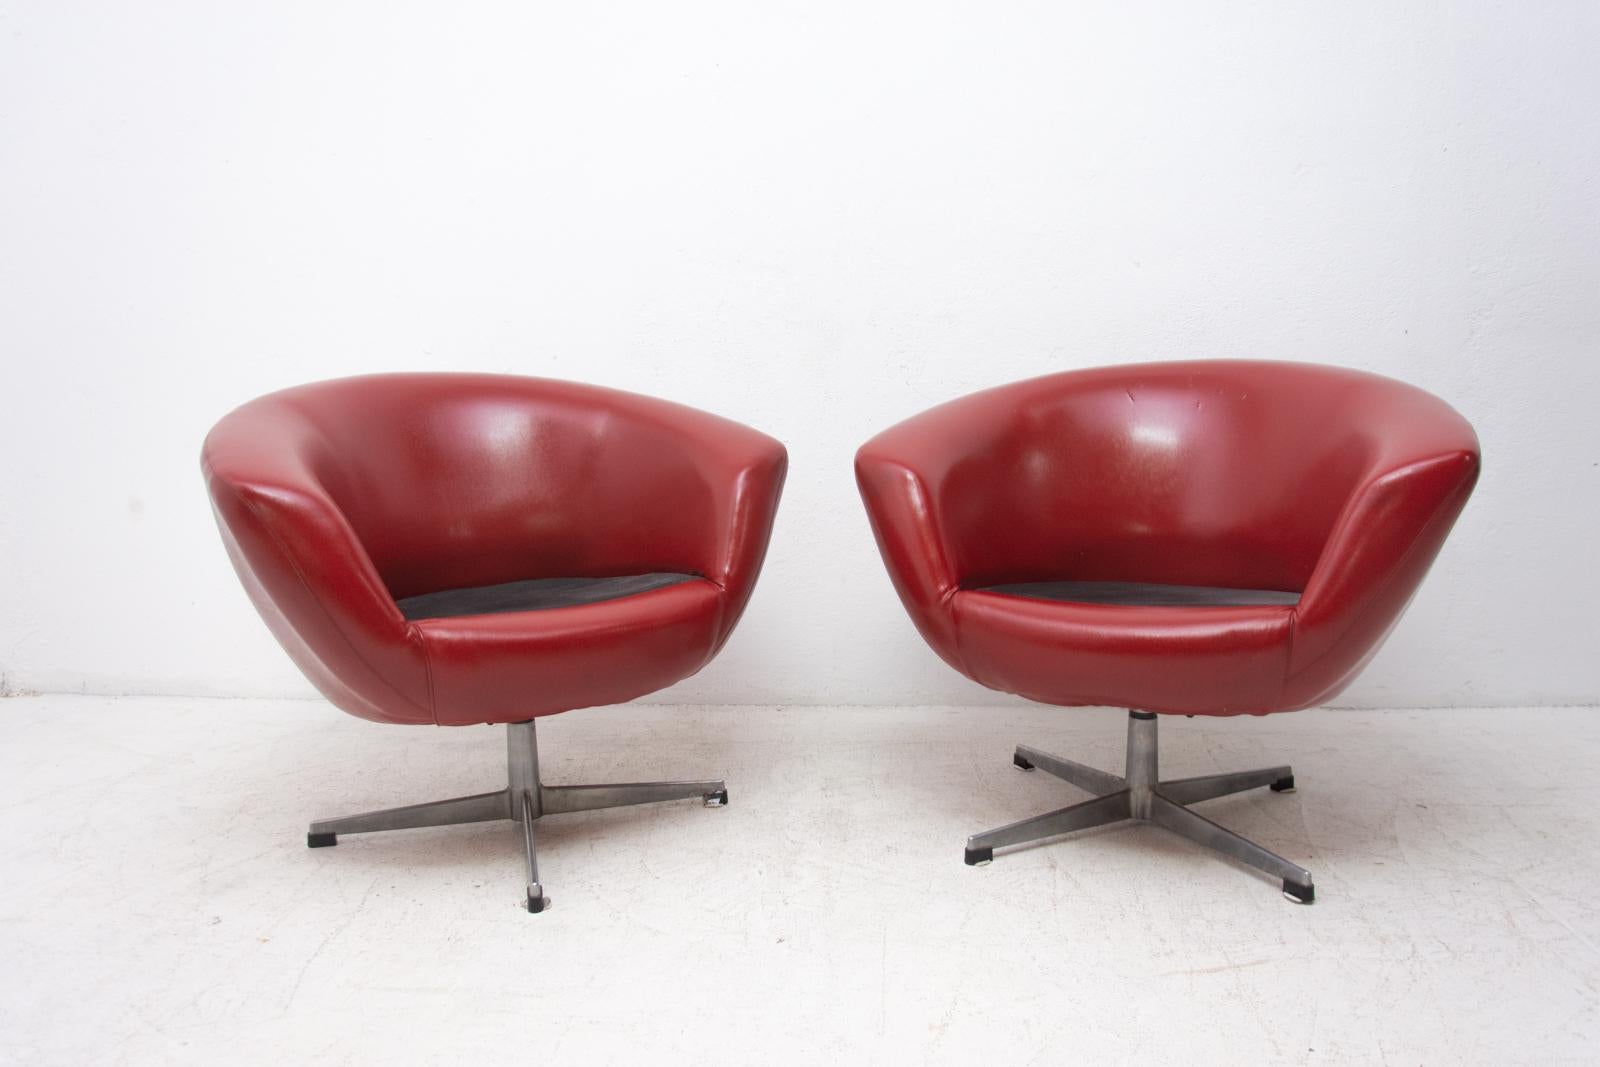 A pair of 1970s swivel chairs manufactured by the famous UP Zavody company. This type of chairs is characterized by their innovative molded expanded construction which provide an extremely lightweight and durable design. The iconic chair features a